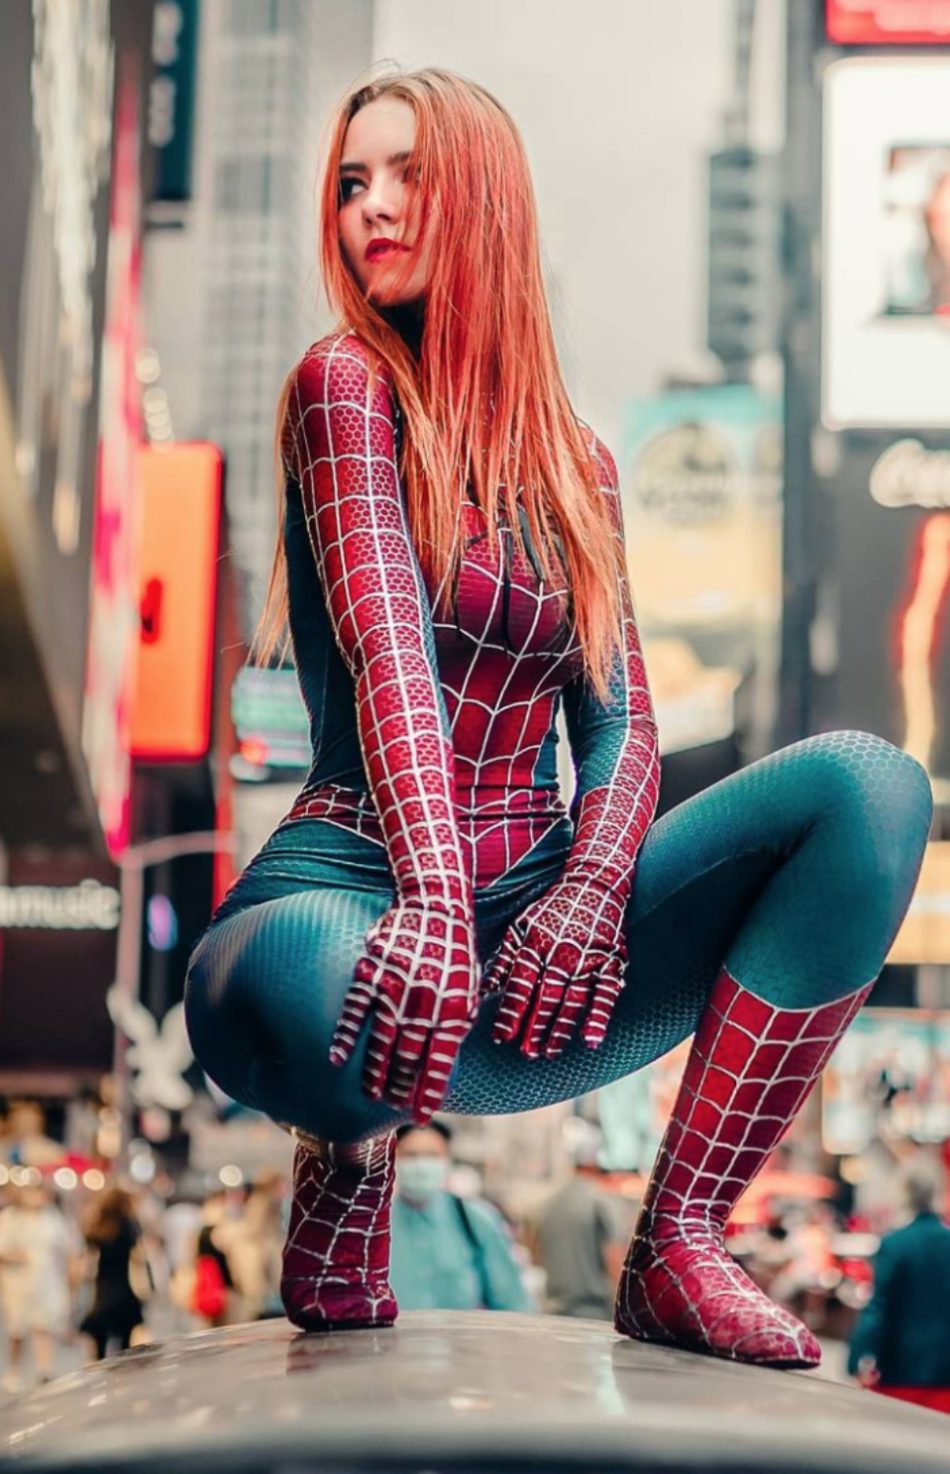 Sexy Red Hot Cosplay Girls Spiderman Women Best Photo Compilation 2021 (89 HQ Photos) 211